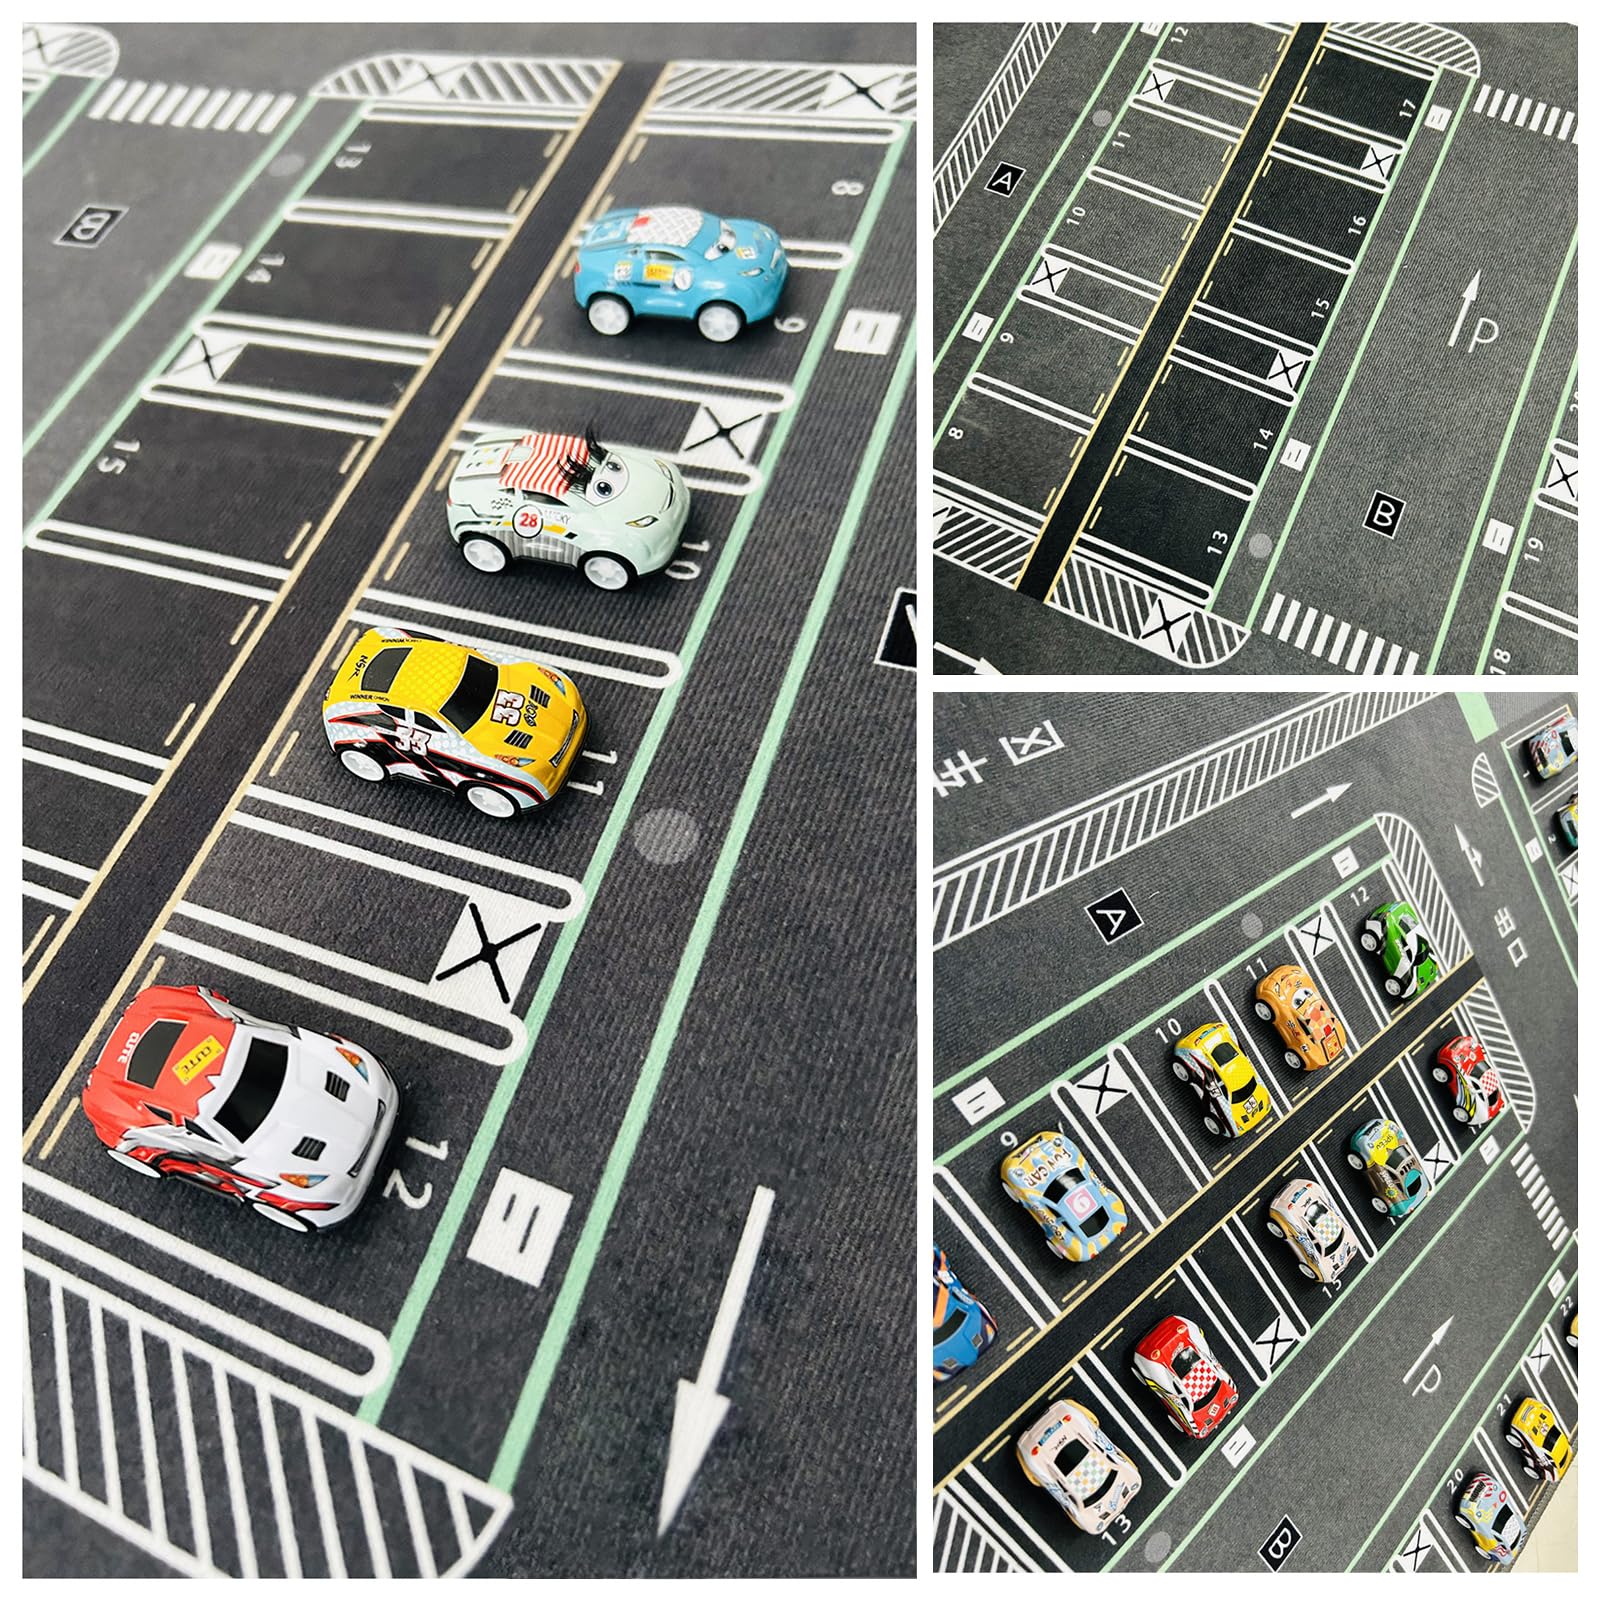 Car Play Rugs, Parking Lot Floor Mat Reading Area Toy Area Game Carpet Car City Traffic Hopscotch Crawling Mat Non-Slip Playroom Room Bedroom Carpet(A,80 * 120cm/31 * 47in)